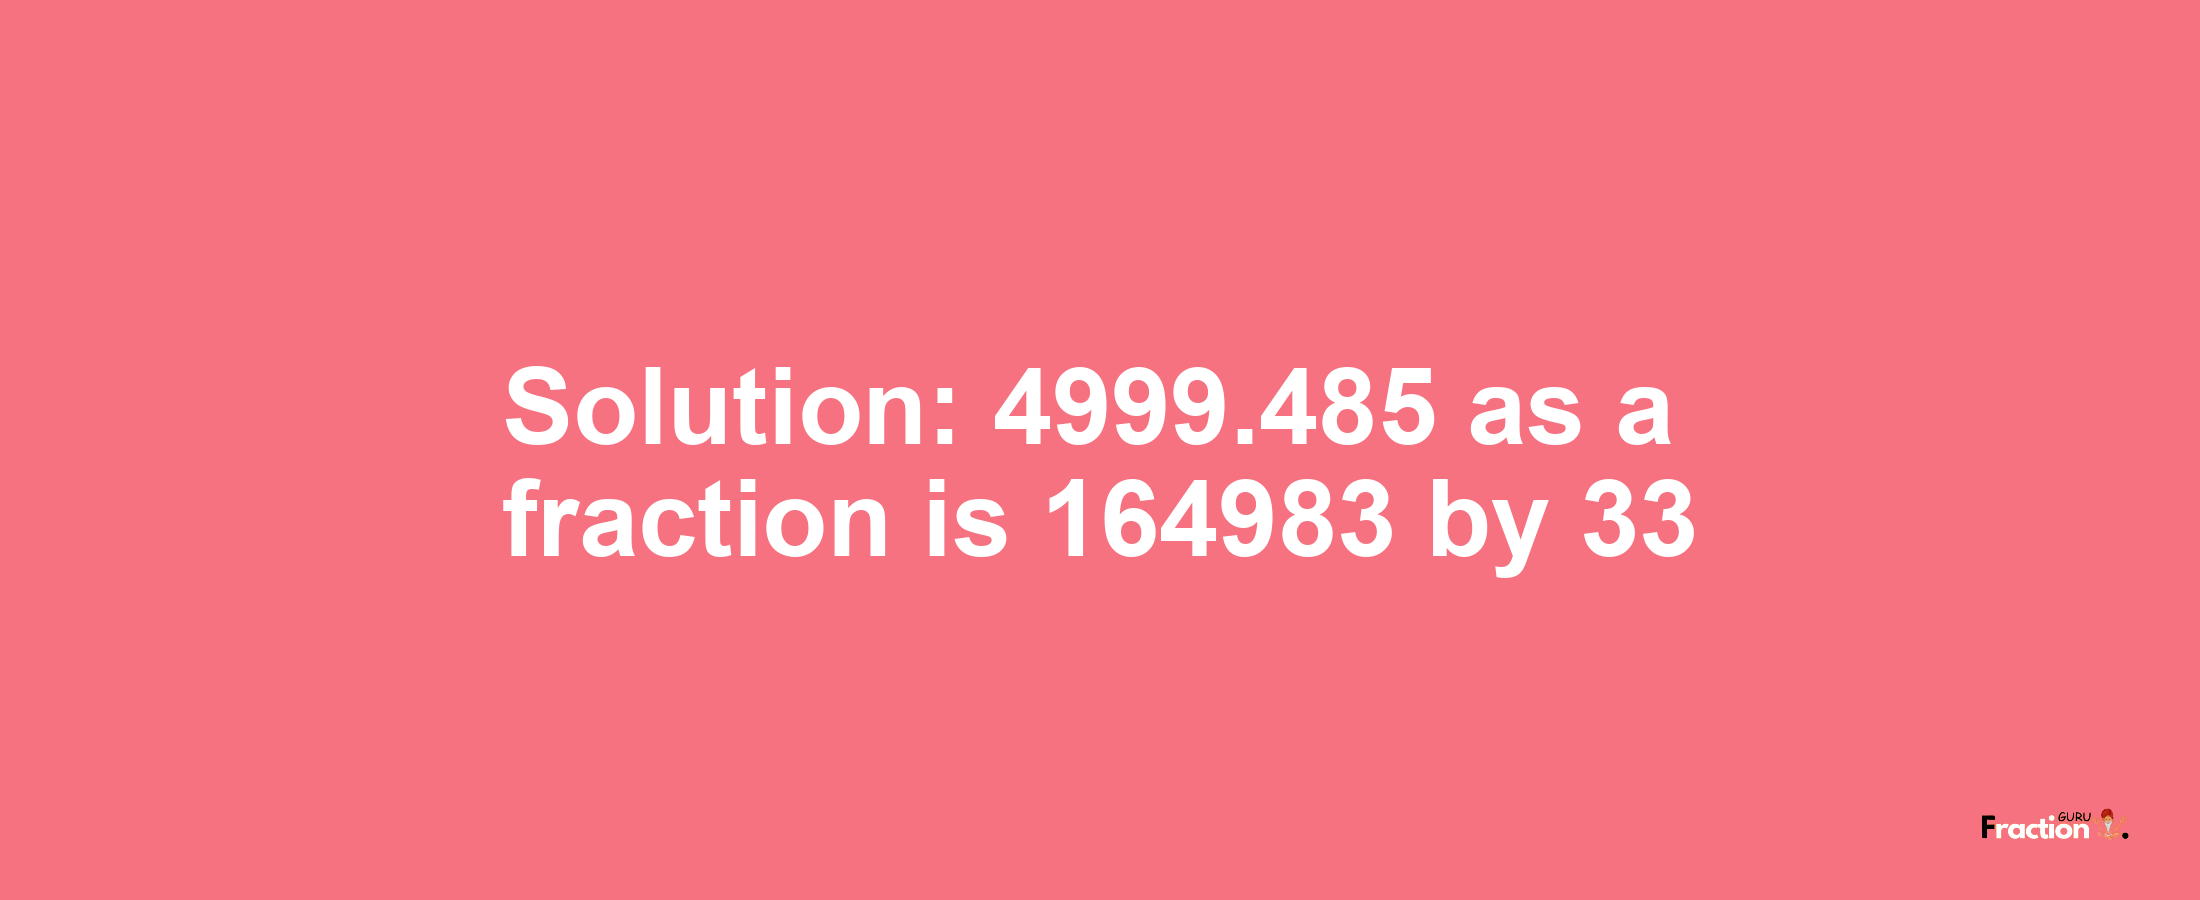 Solution:4999.485 as a fraction is 164983/33